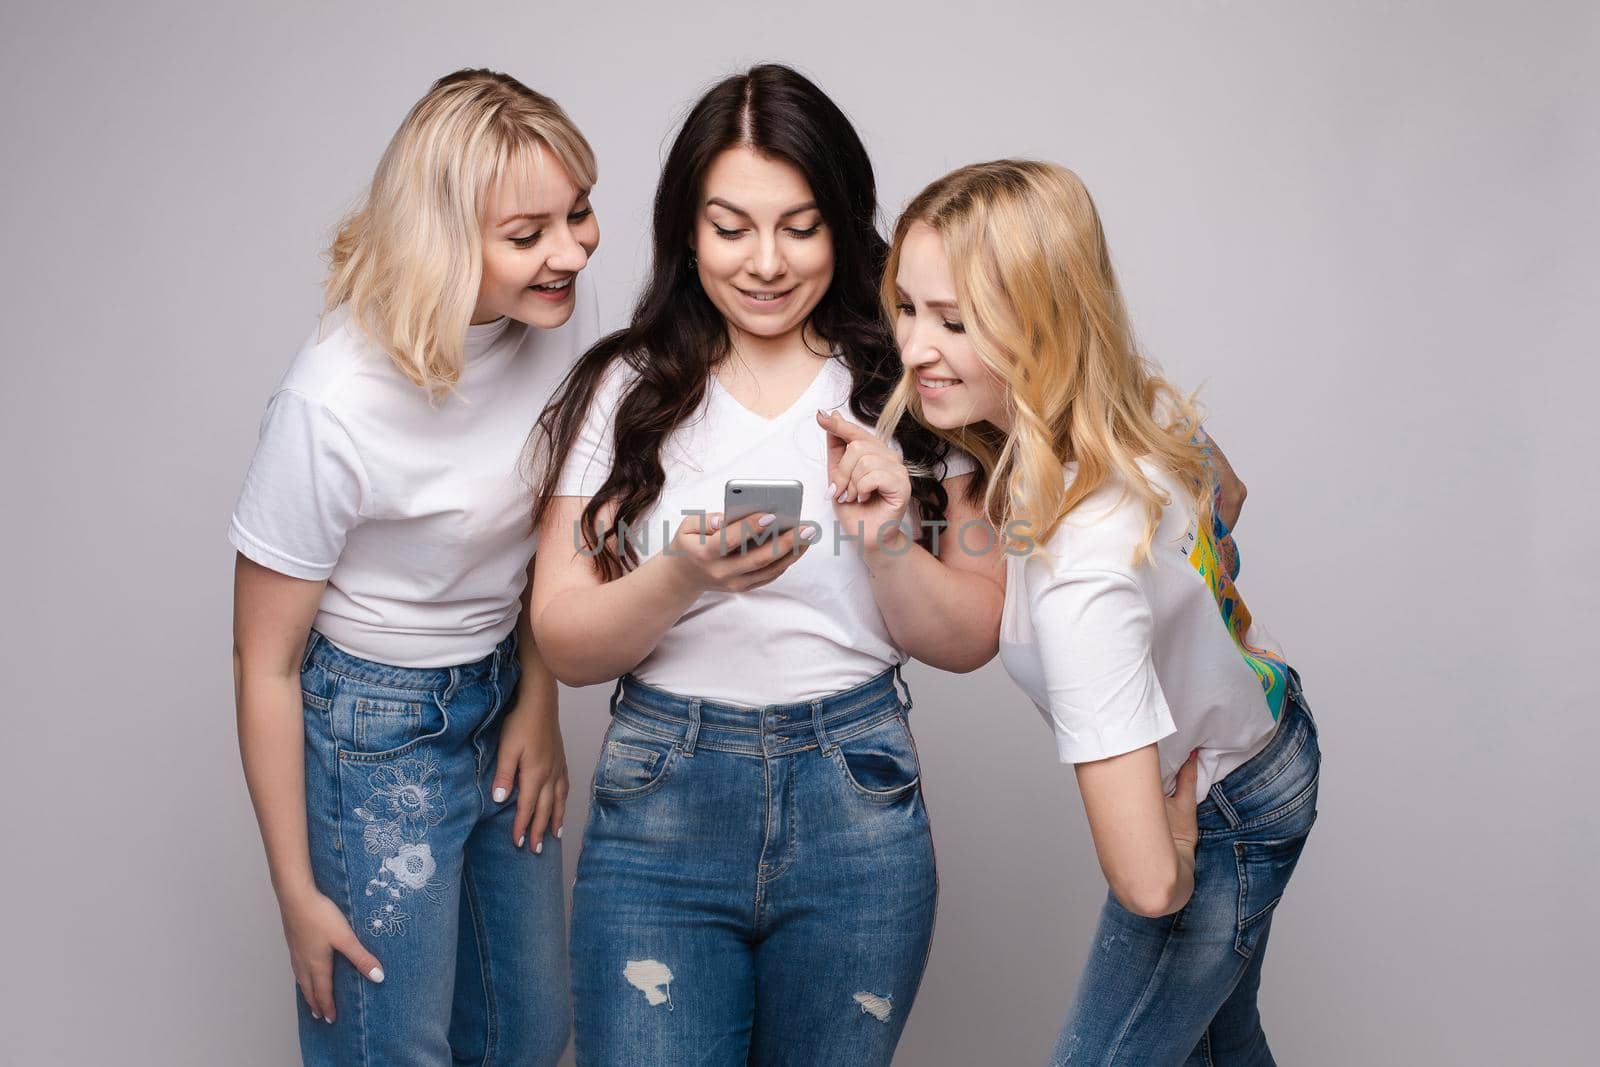 Girls looking at phone screen together.Studio portrait of two girls loking at the mobile phone while blonde girls using it. Gossip or rumour concept. Isolate. by StudioLucky